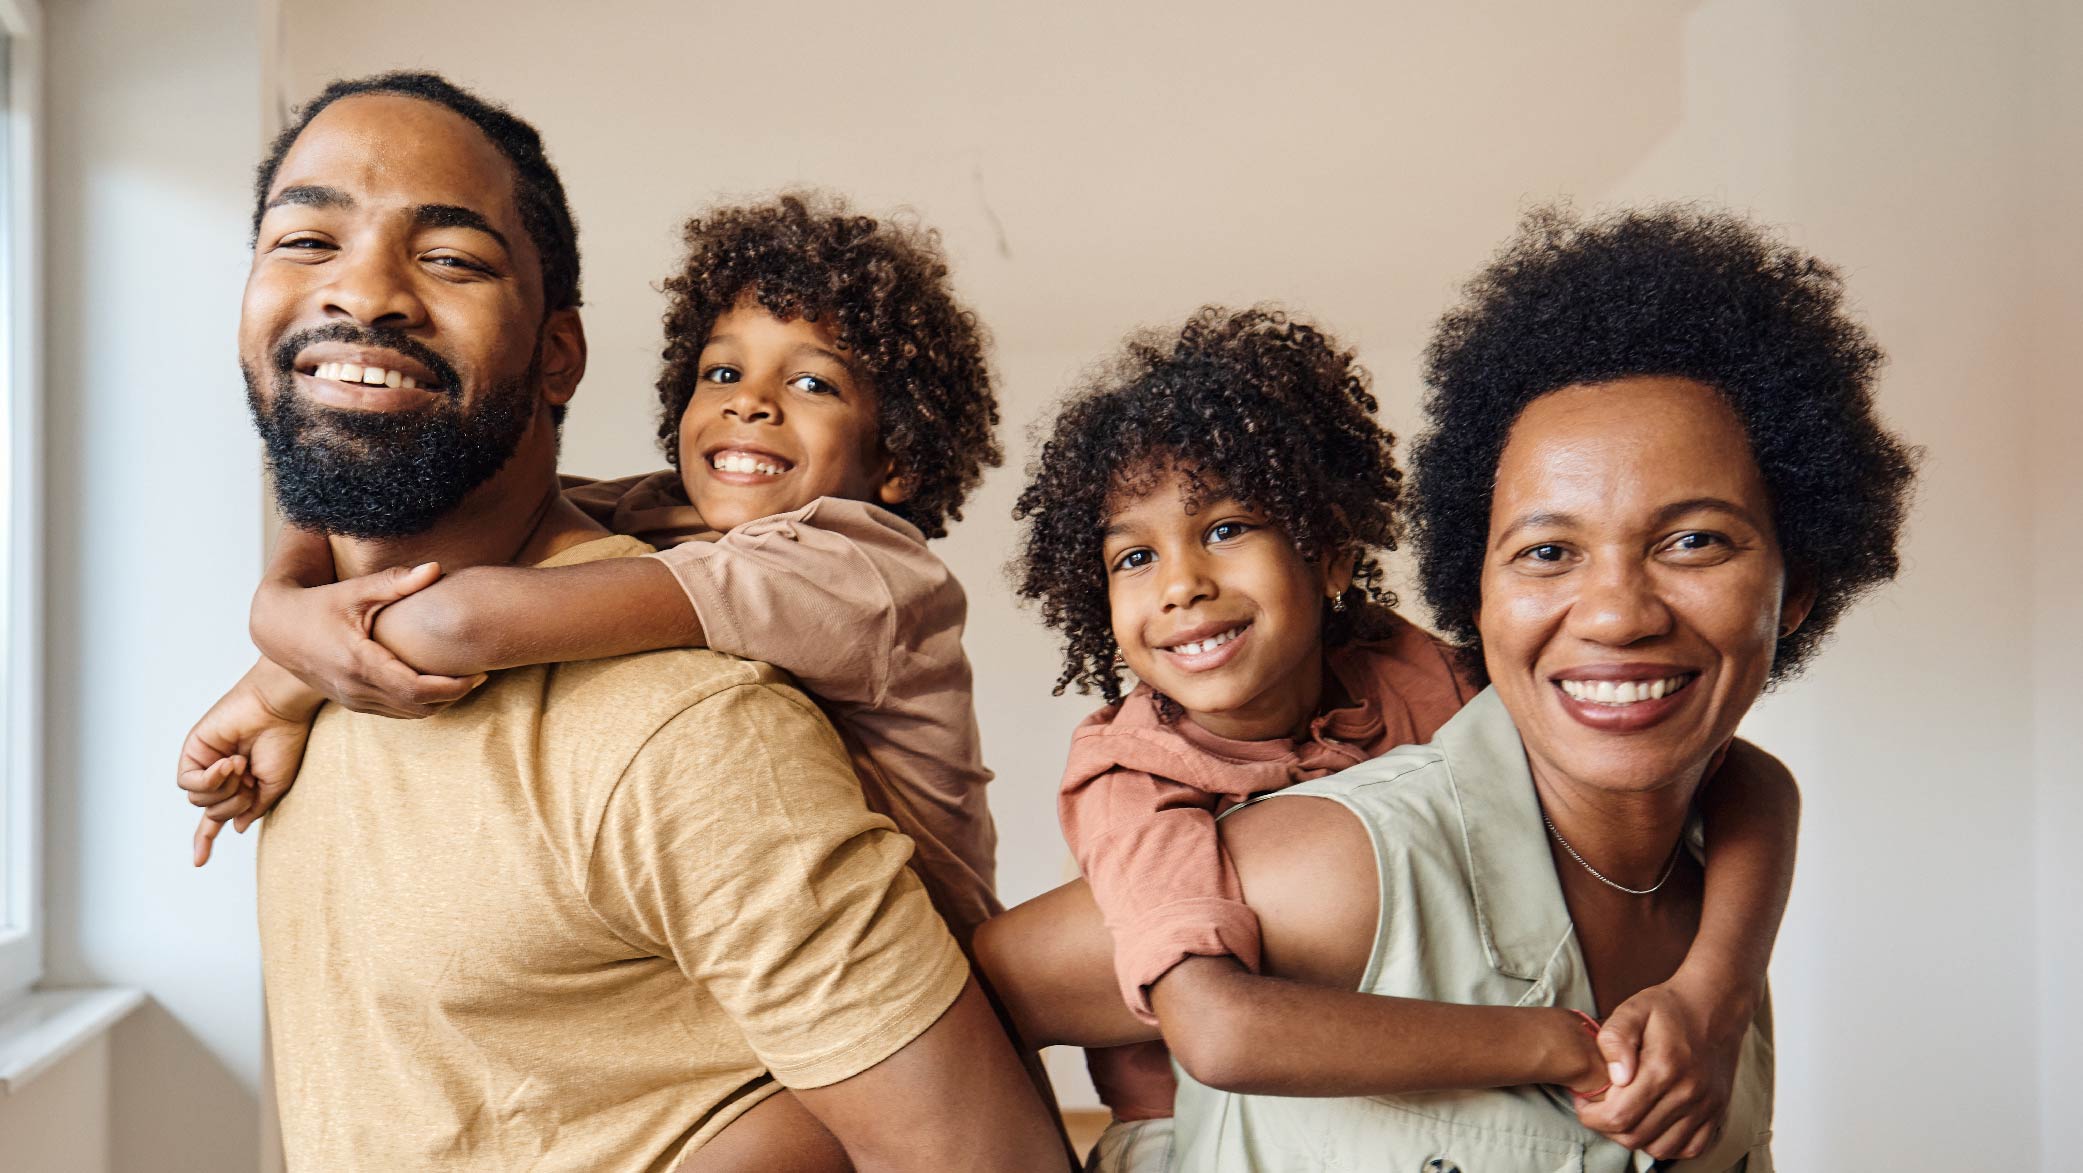 A Black man, woman, and two young children smiling